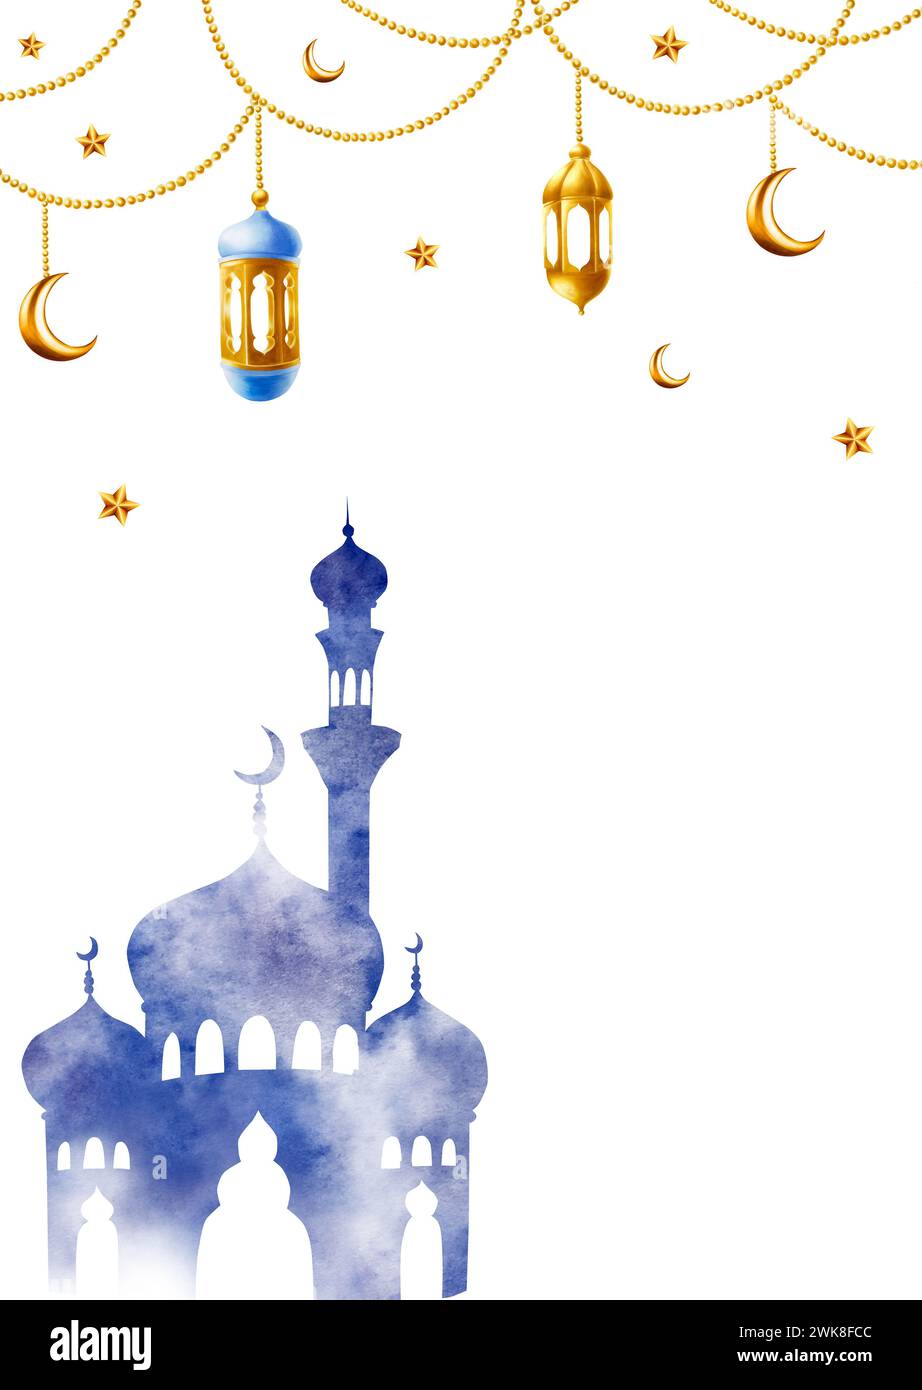 Watercolor Islamic arabian postcard, frame with silhouette of mosque and minaret, golden crescent moon, stars on a gold chains, lanterns illustration Stock Photo